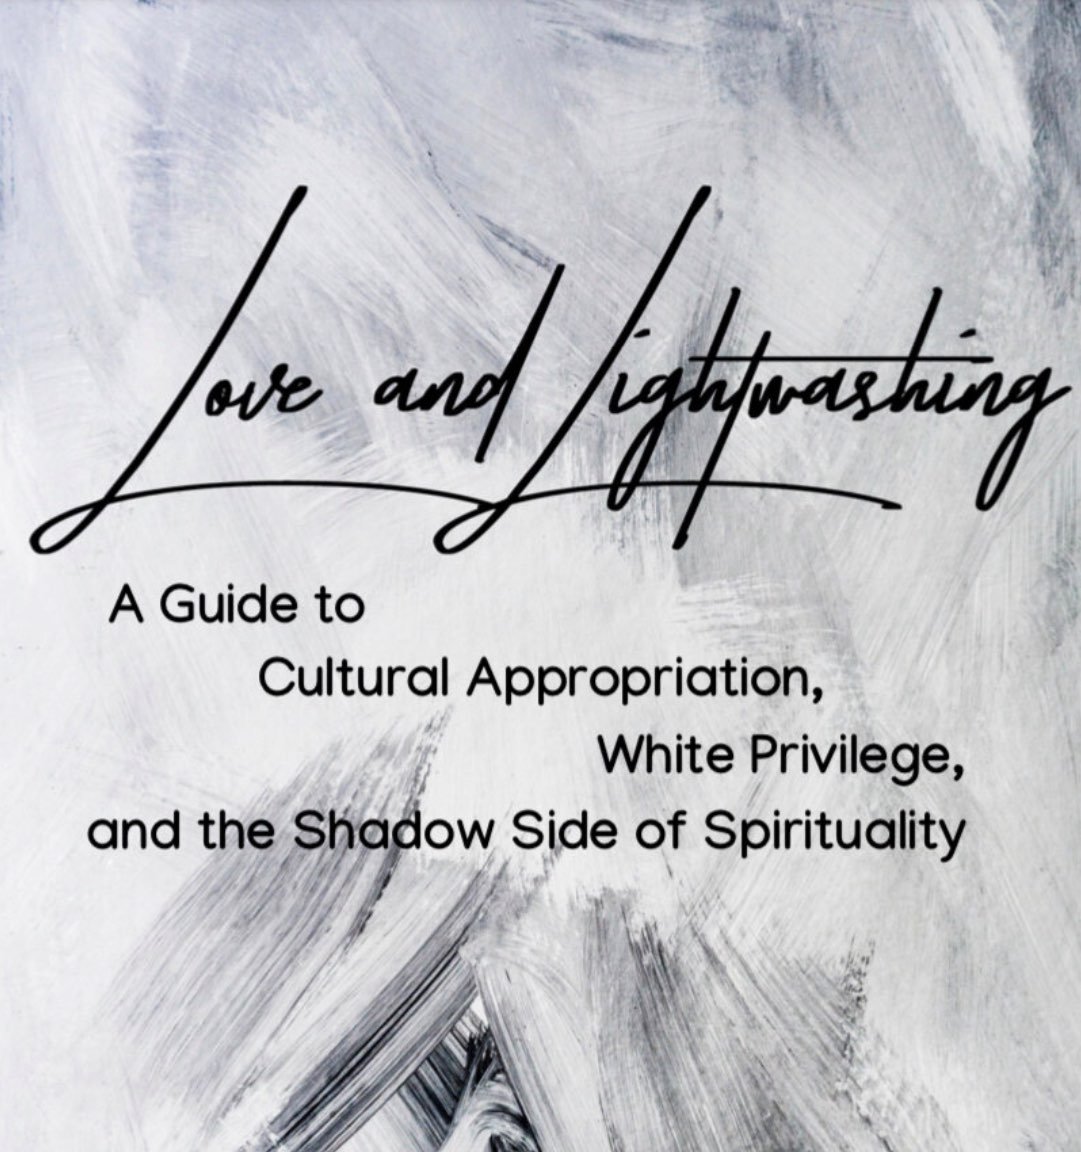 Love and Lightwashing: A Guide Cultural Appropriation, White Privilege and the Shadow Side of Spirituality